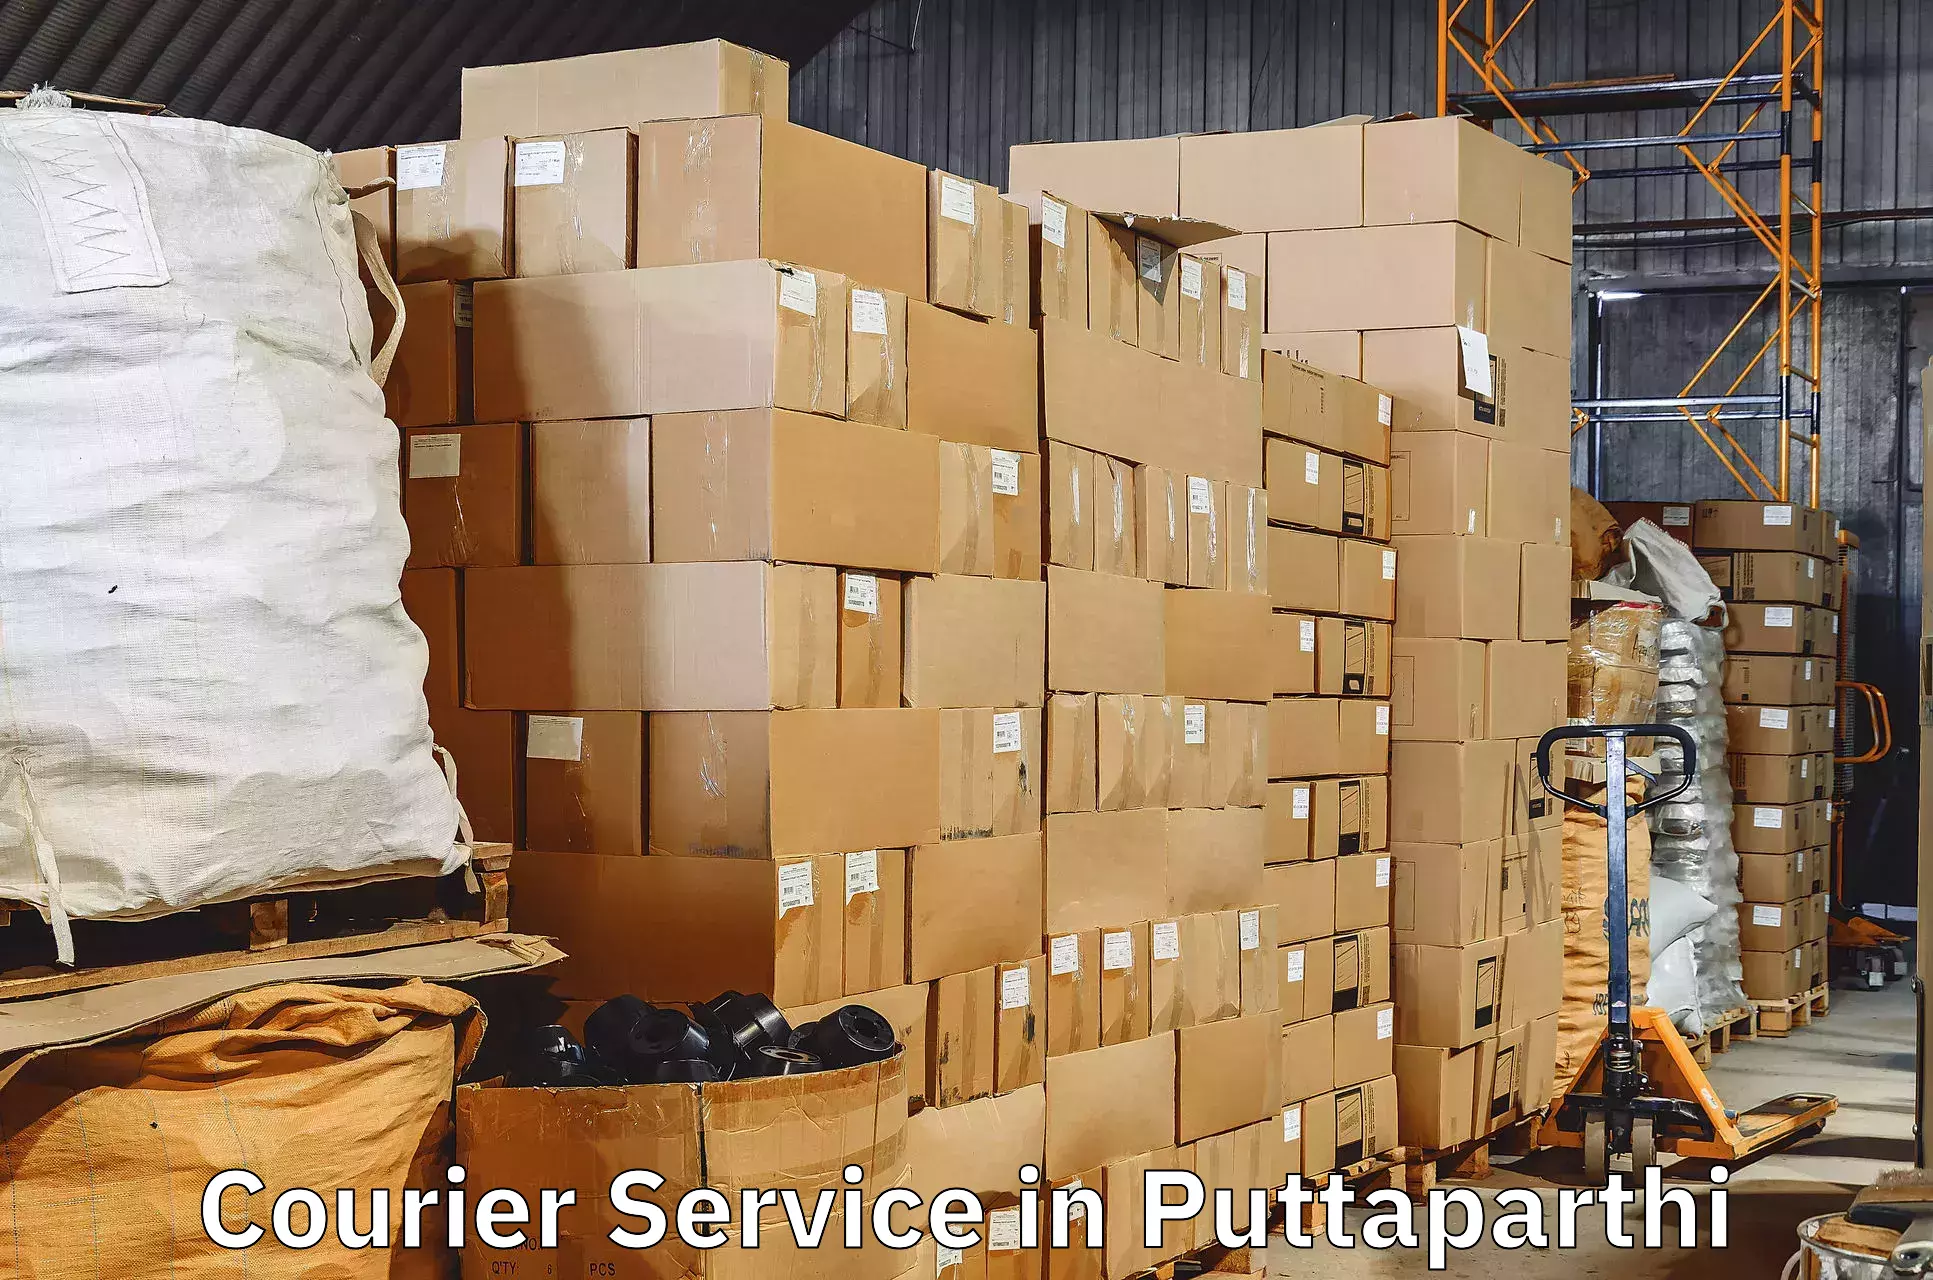 Air courier services in Puttaparthi